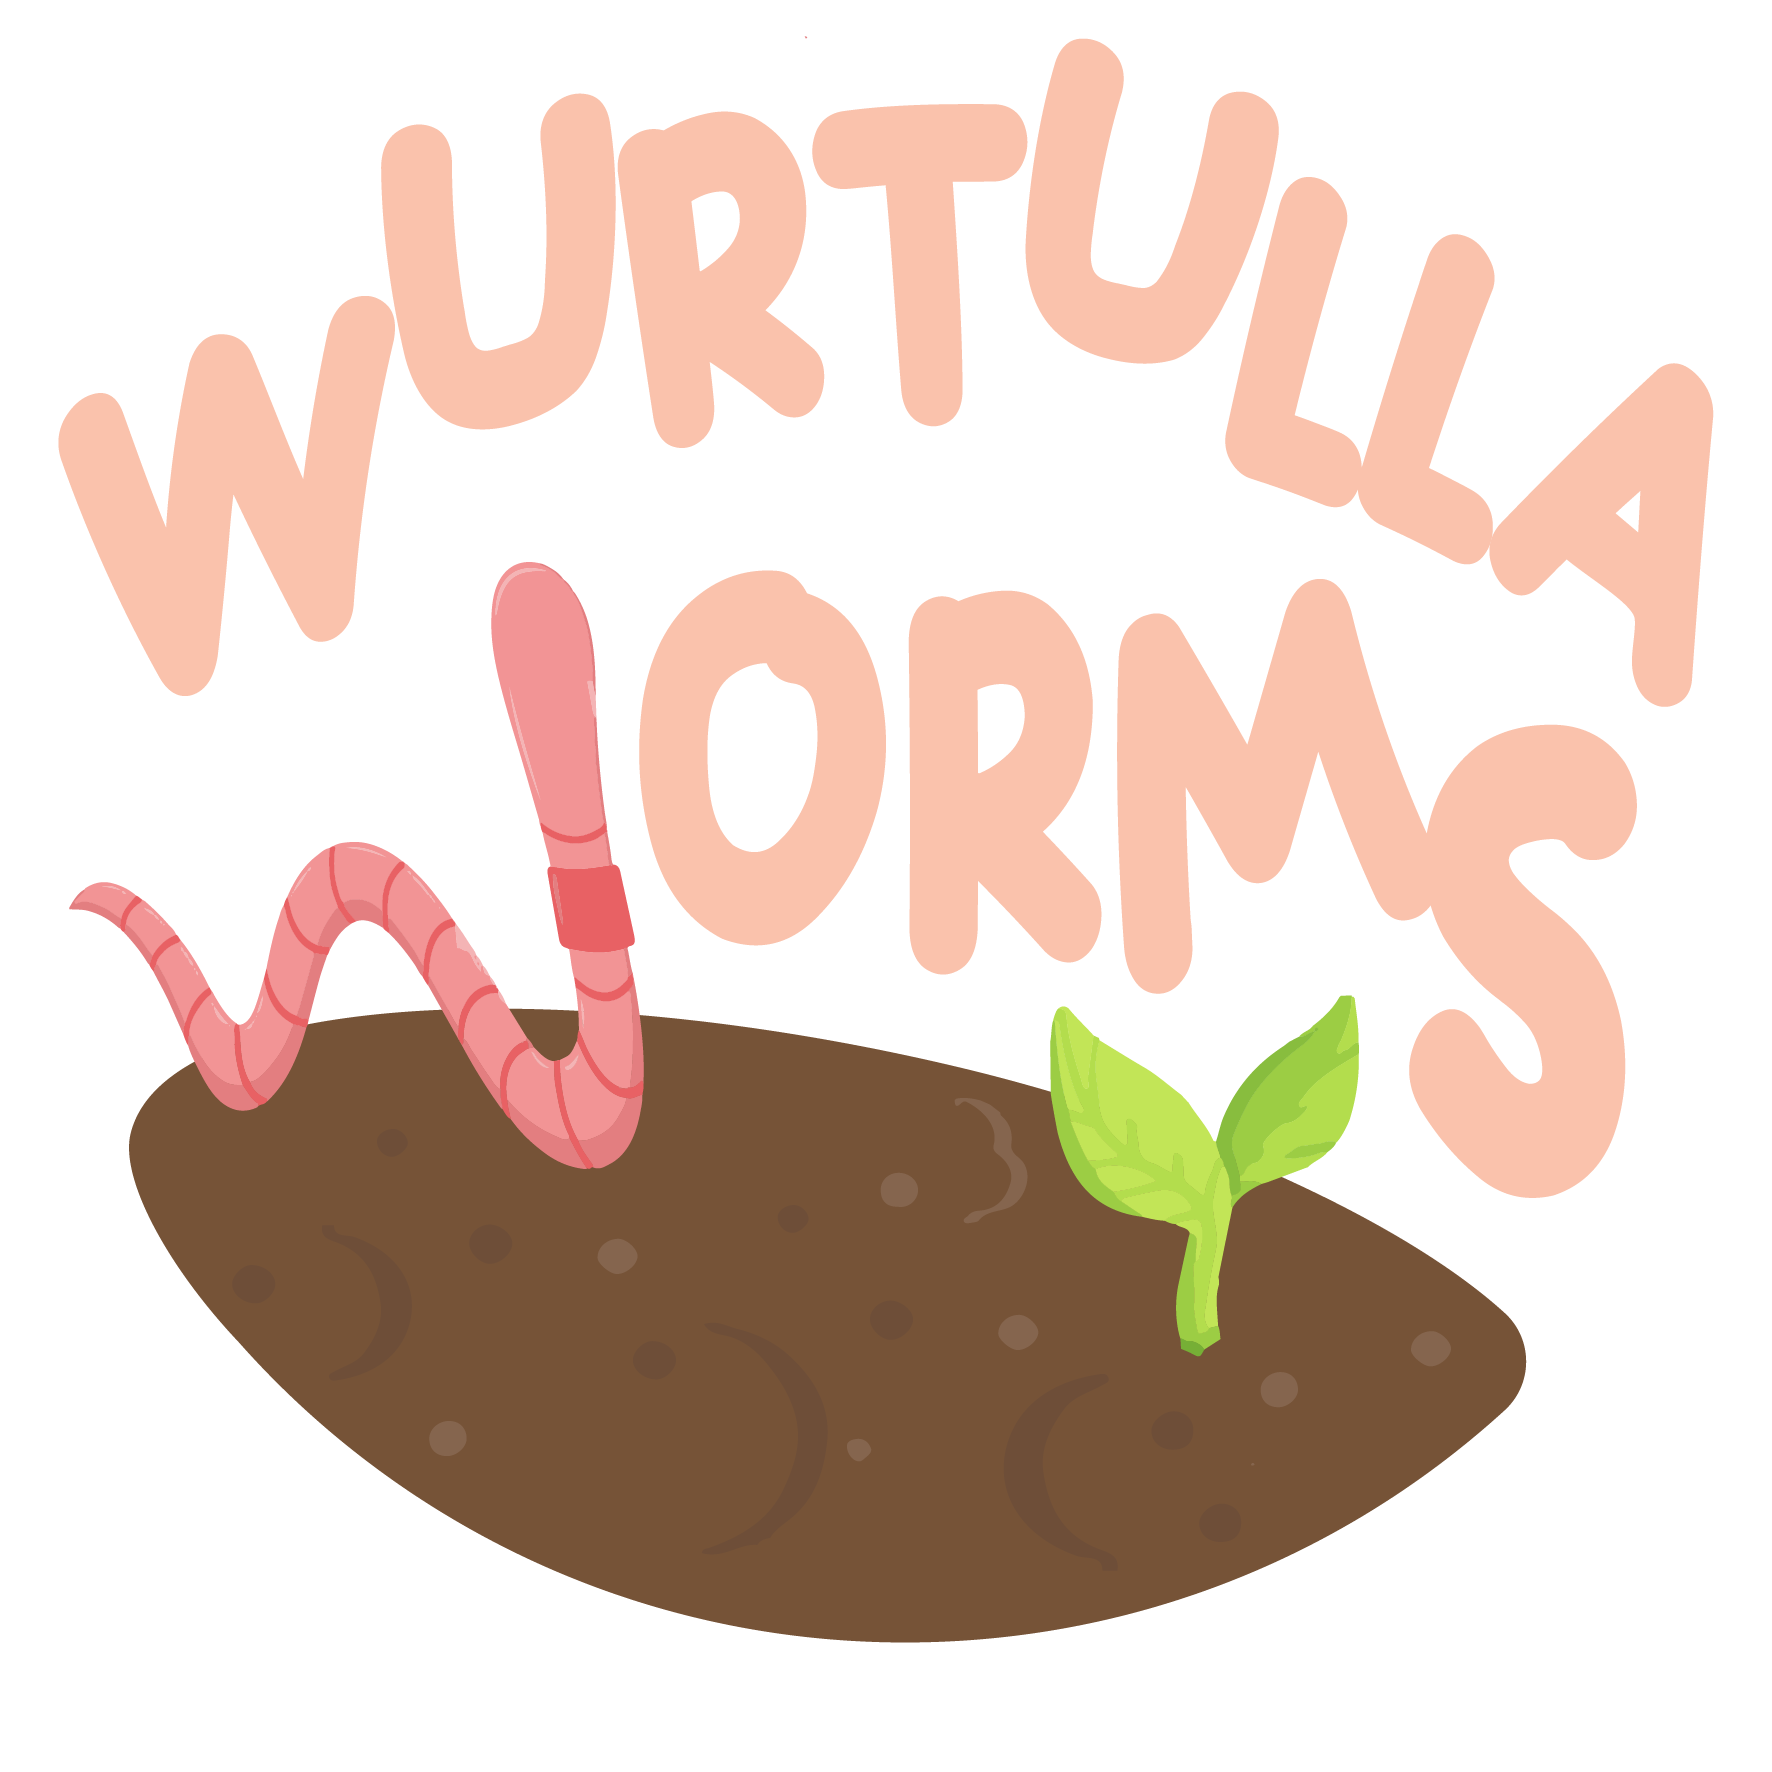 Aerated Worm Tea (made to order, pick up only) – Wurtulla Worms